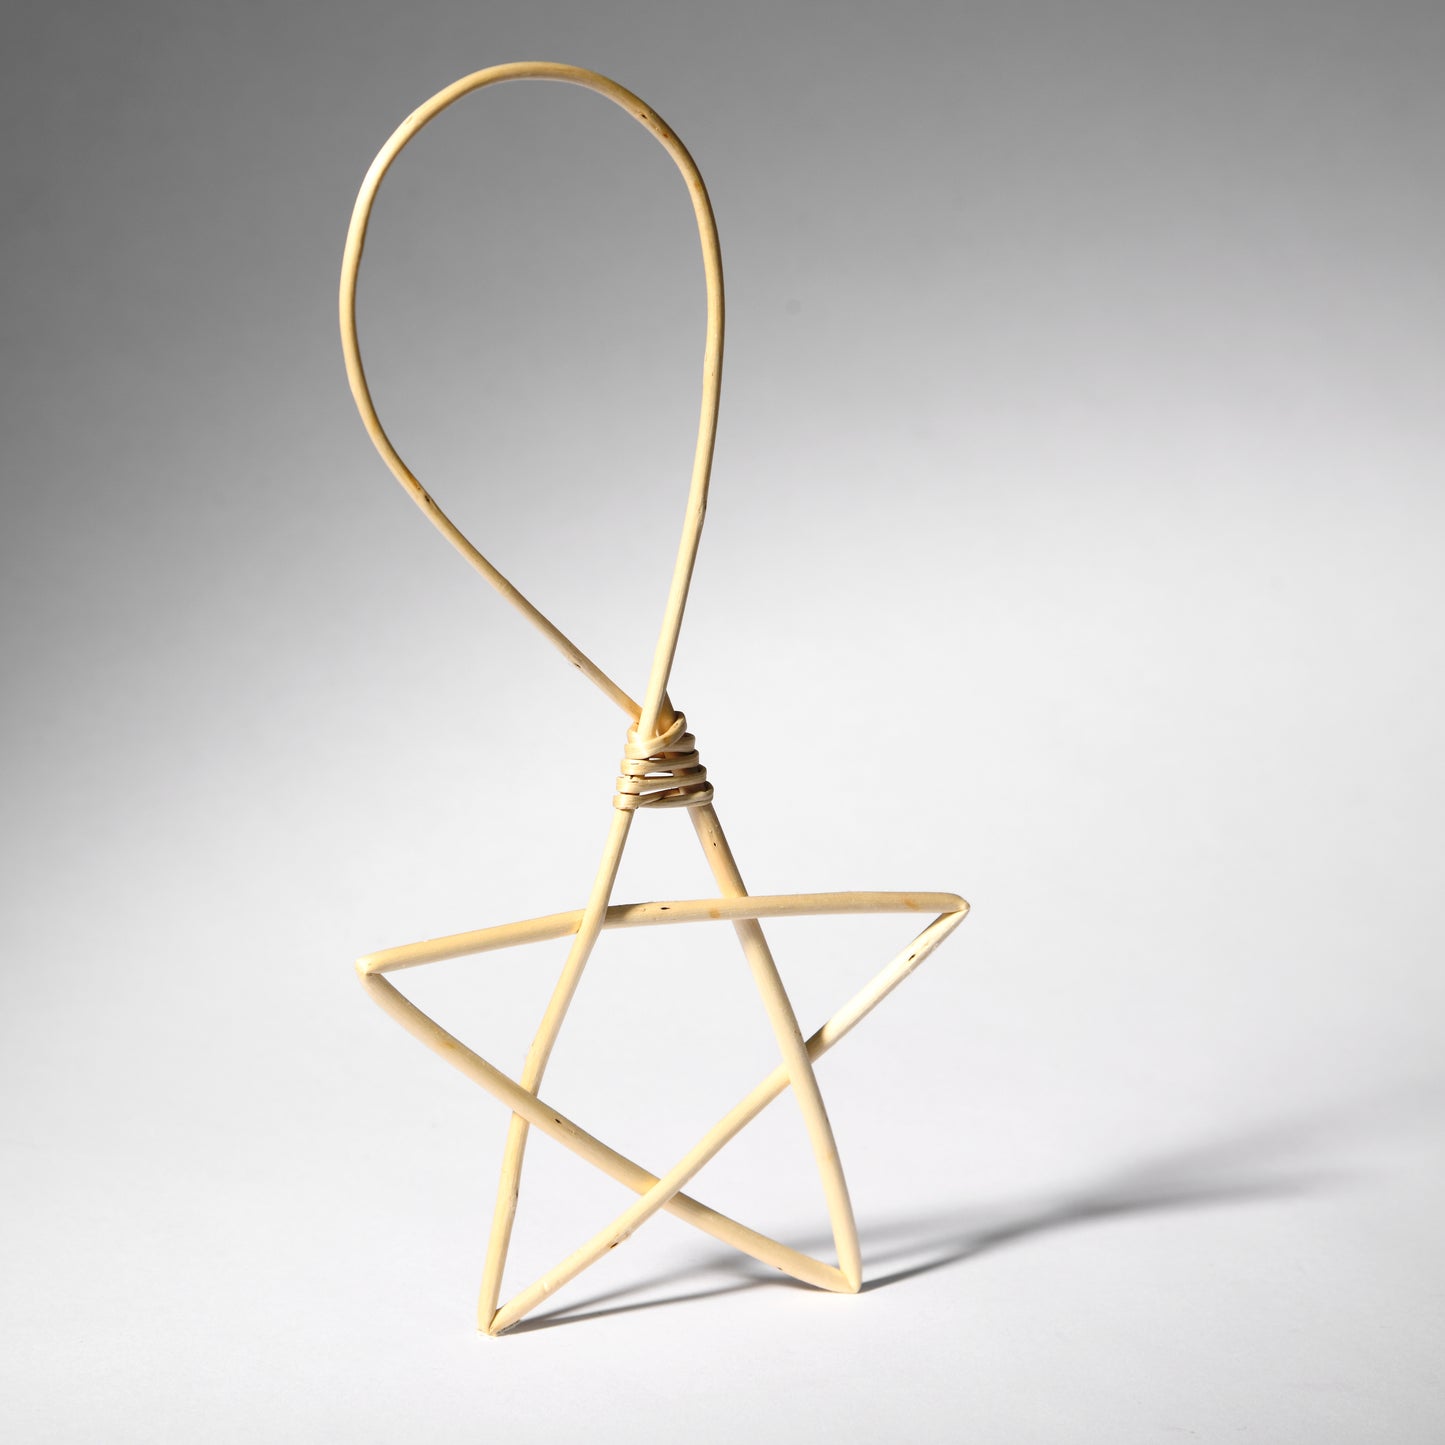 A simple willow star decoration to add joy.